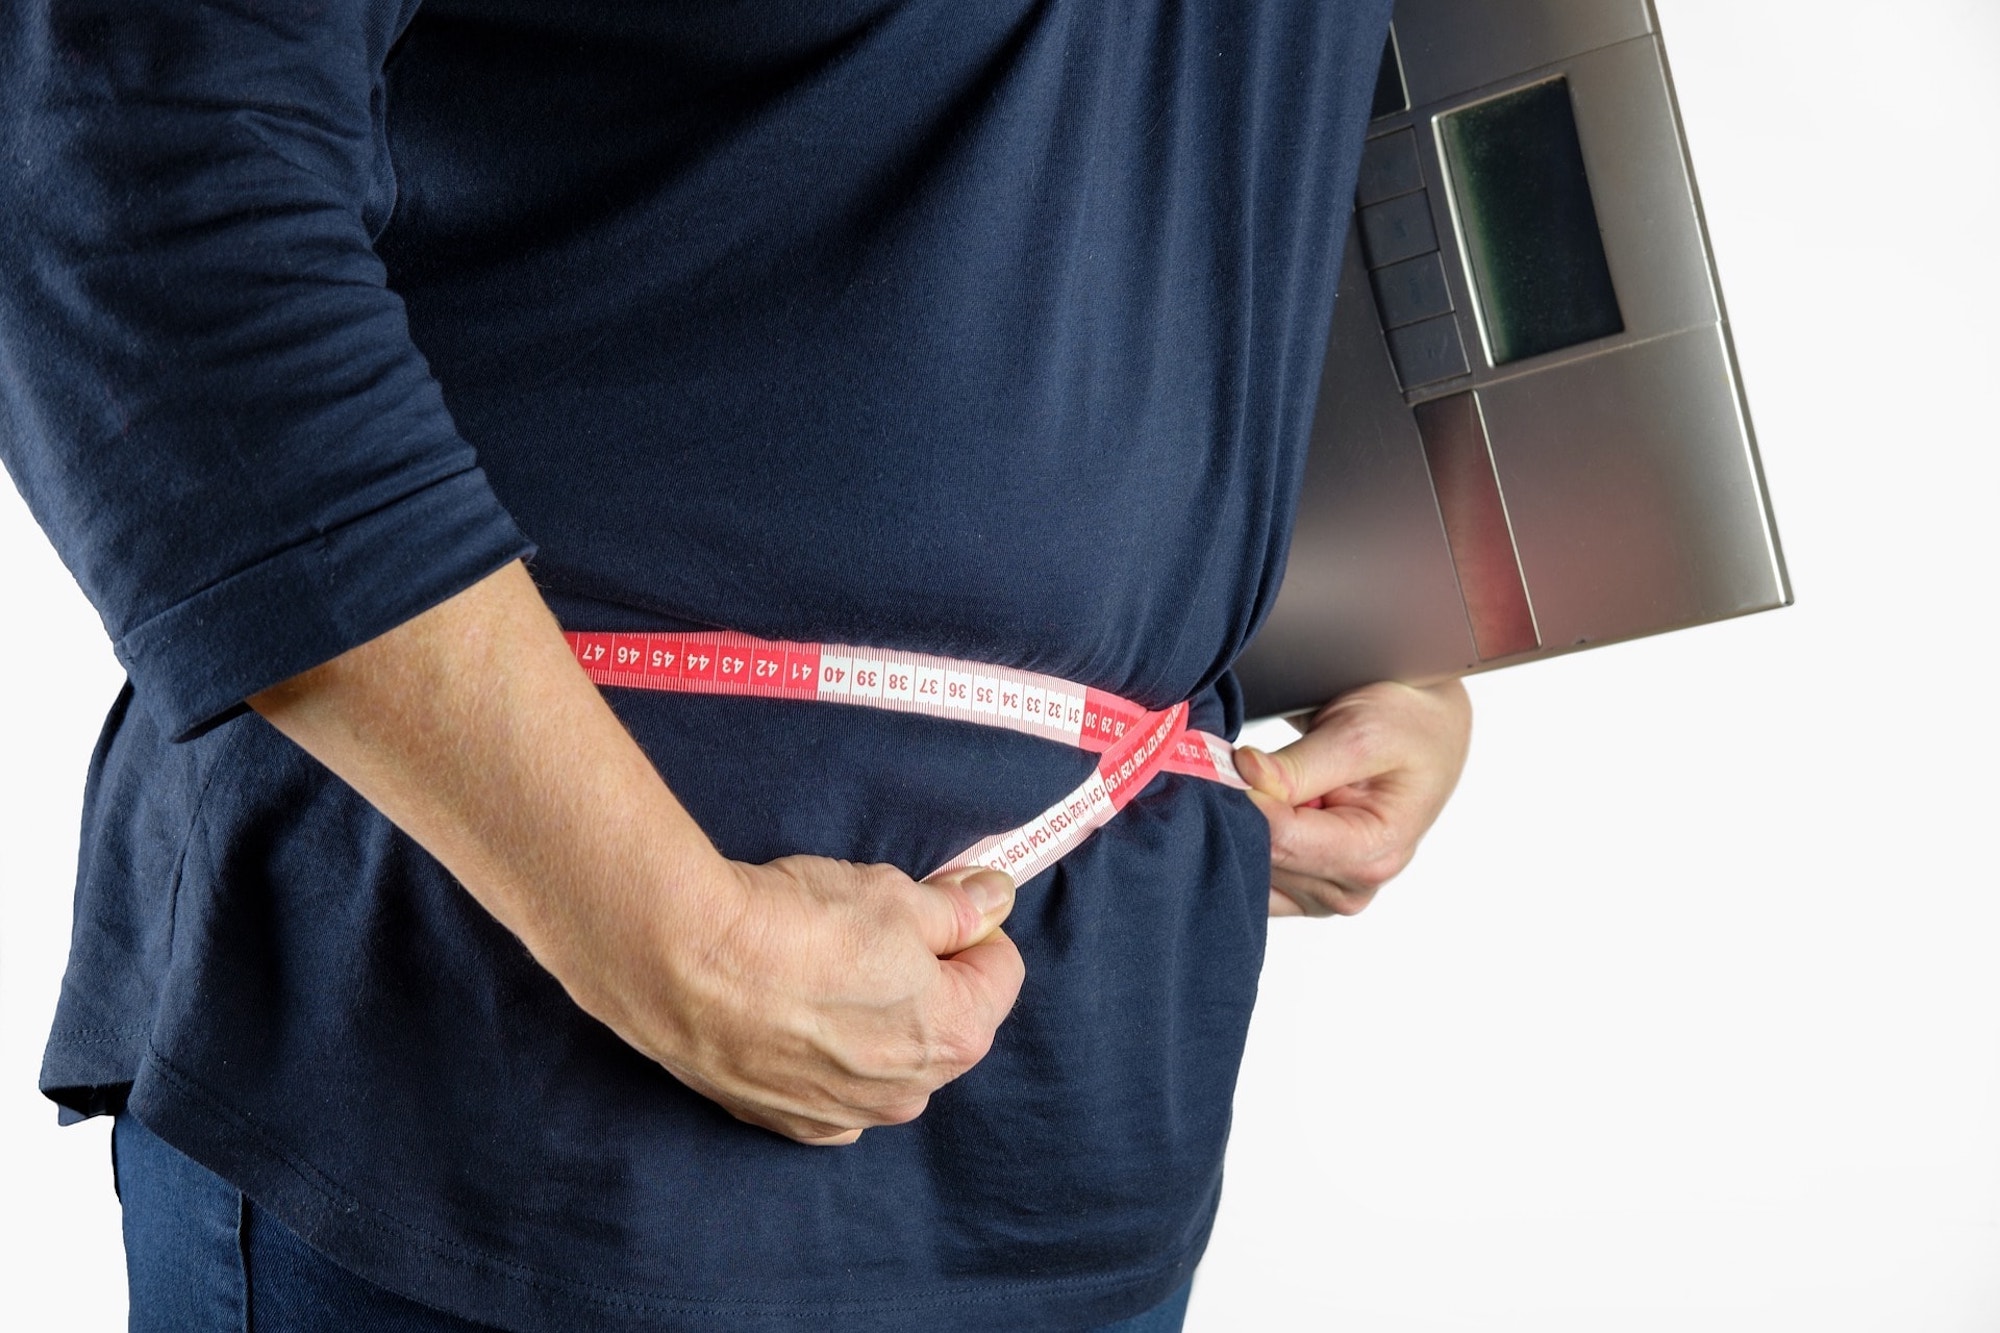 The United States Has the Highest Percent of Obesity in Adults at 36.2%